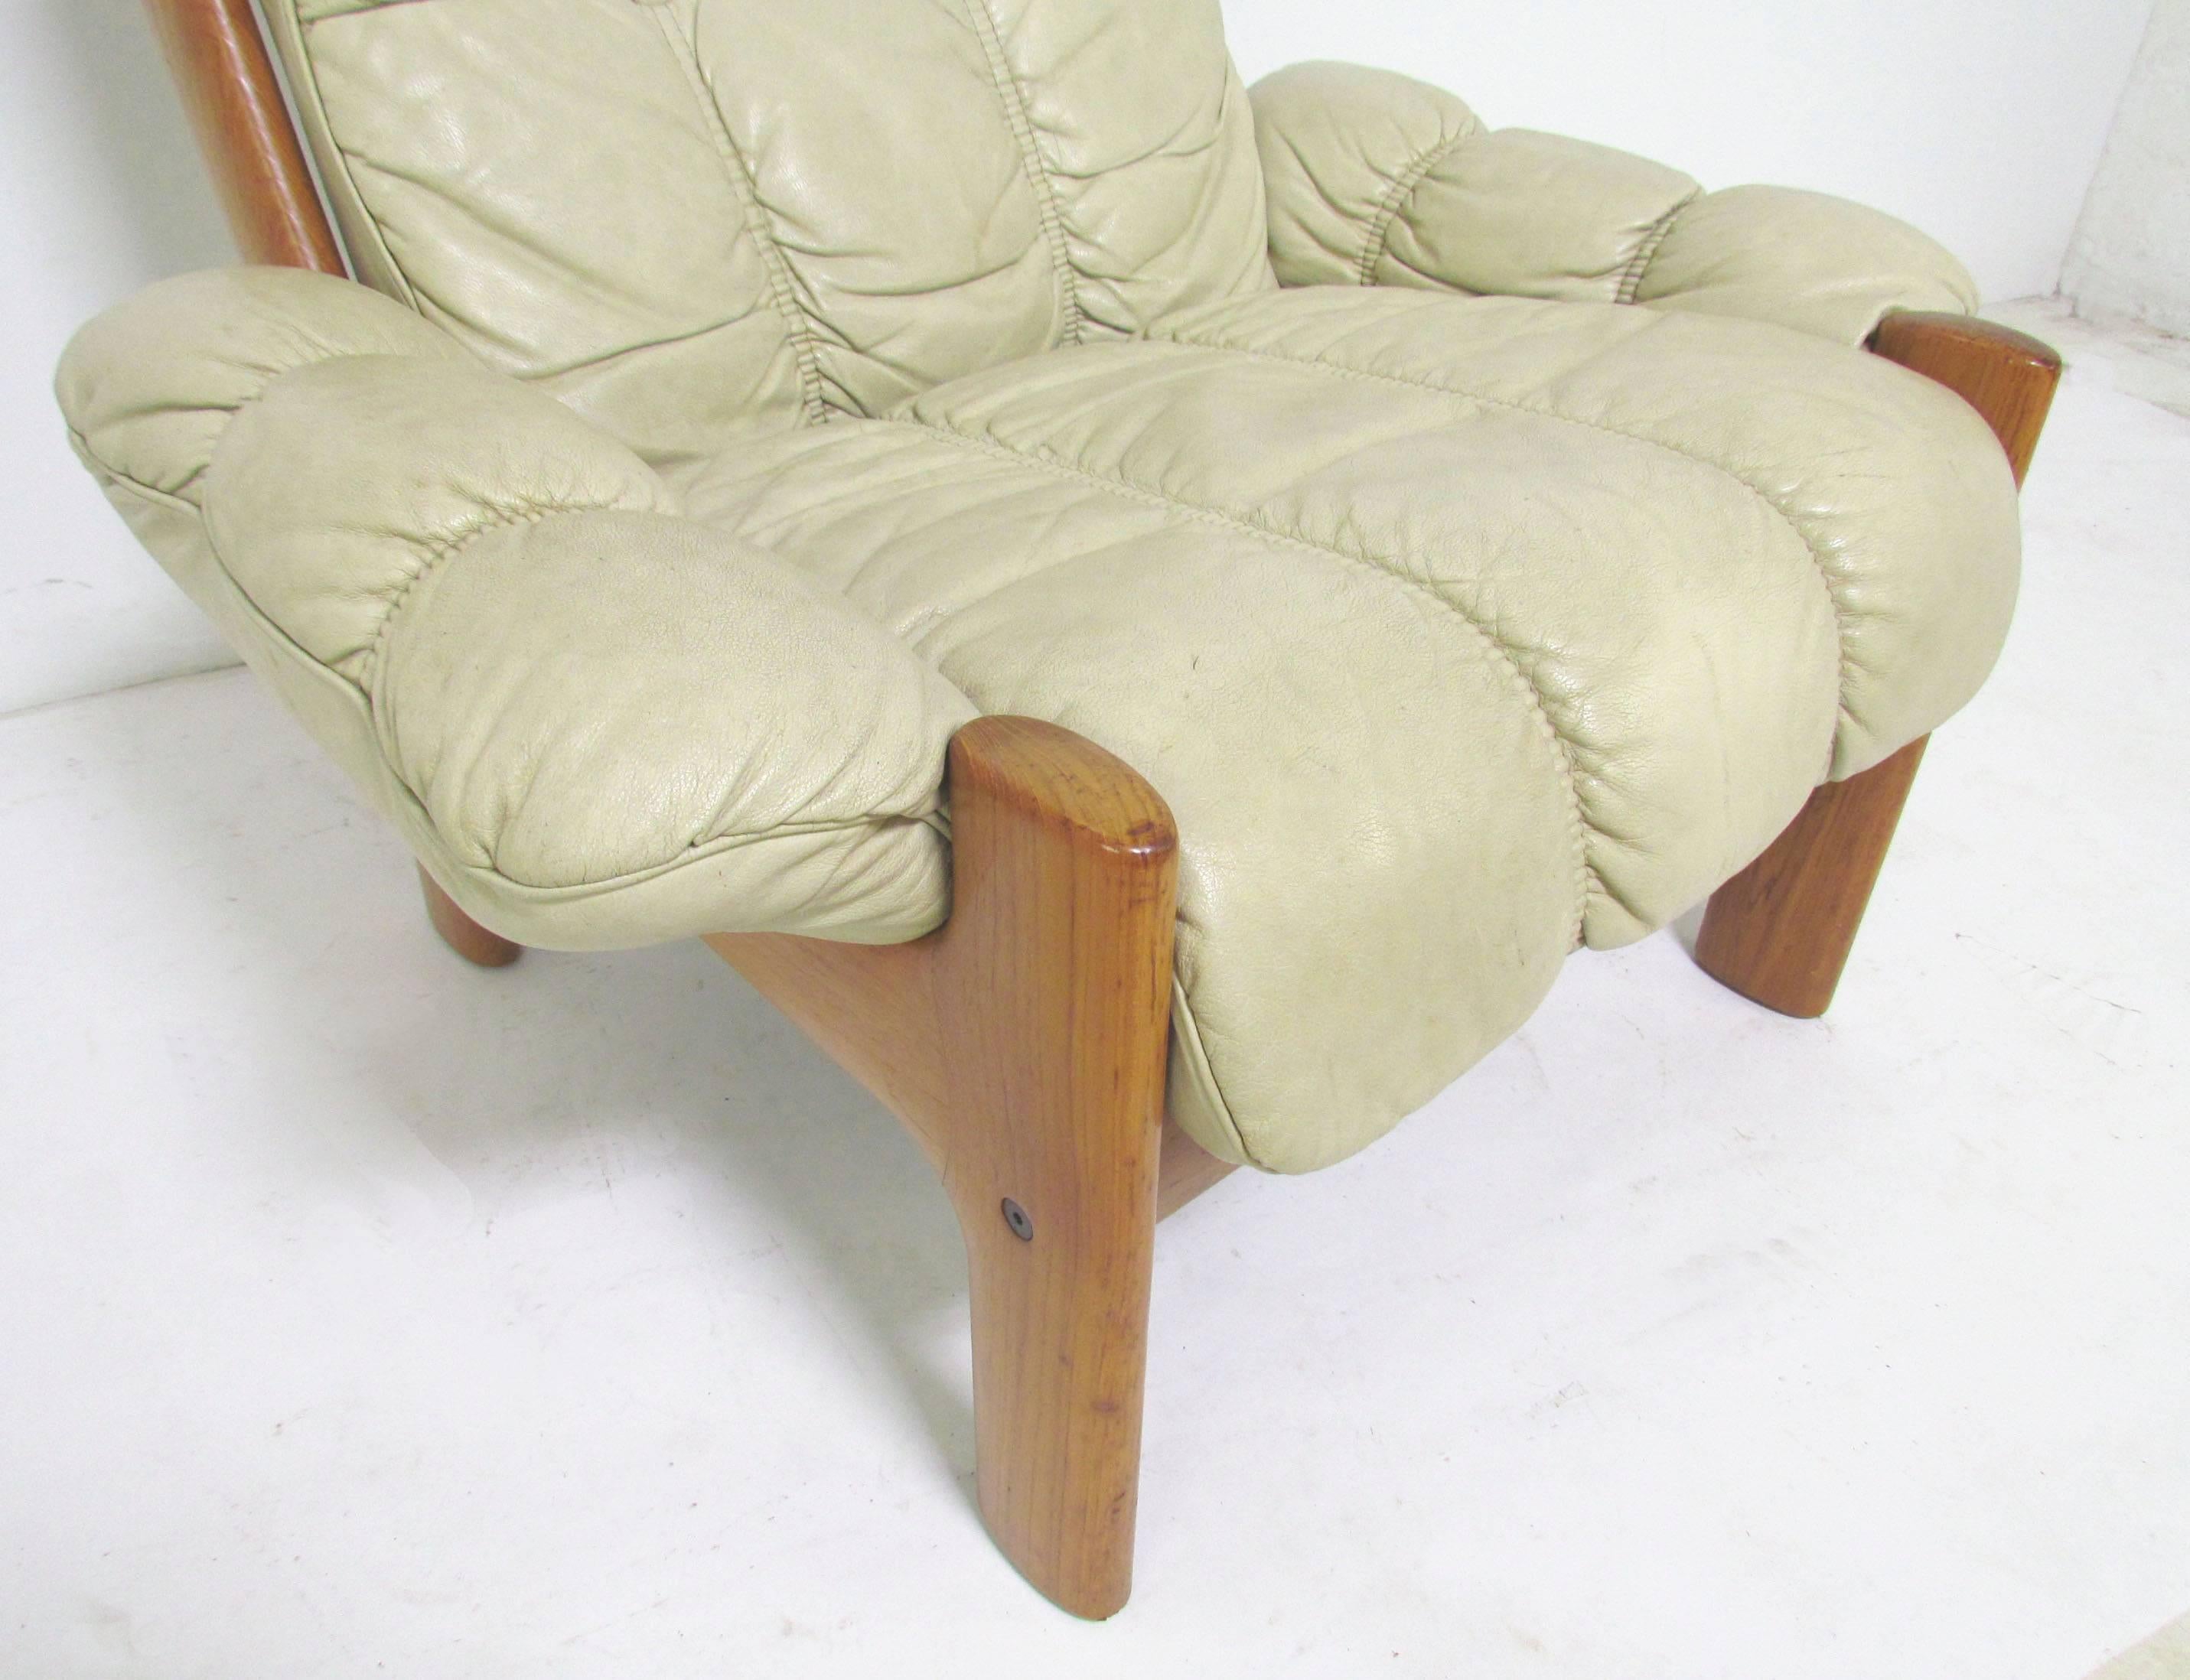 Late 20th Century Scandinavian Modern Teak and Leather Lounge Chair by Ekornes